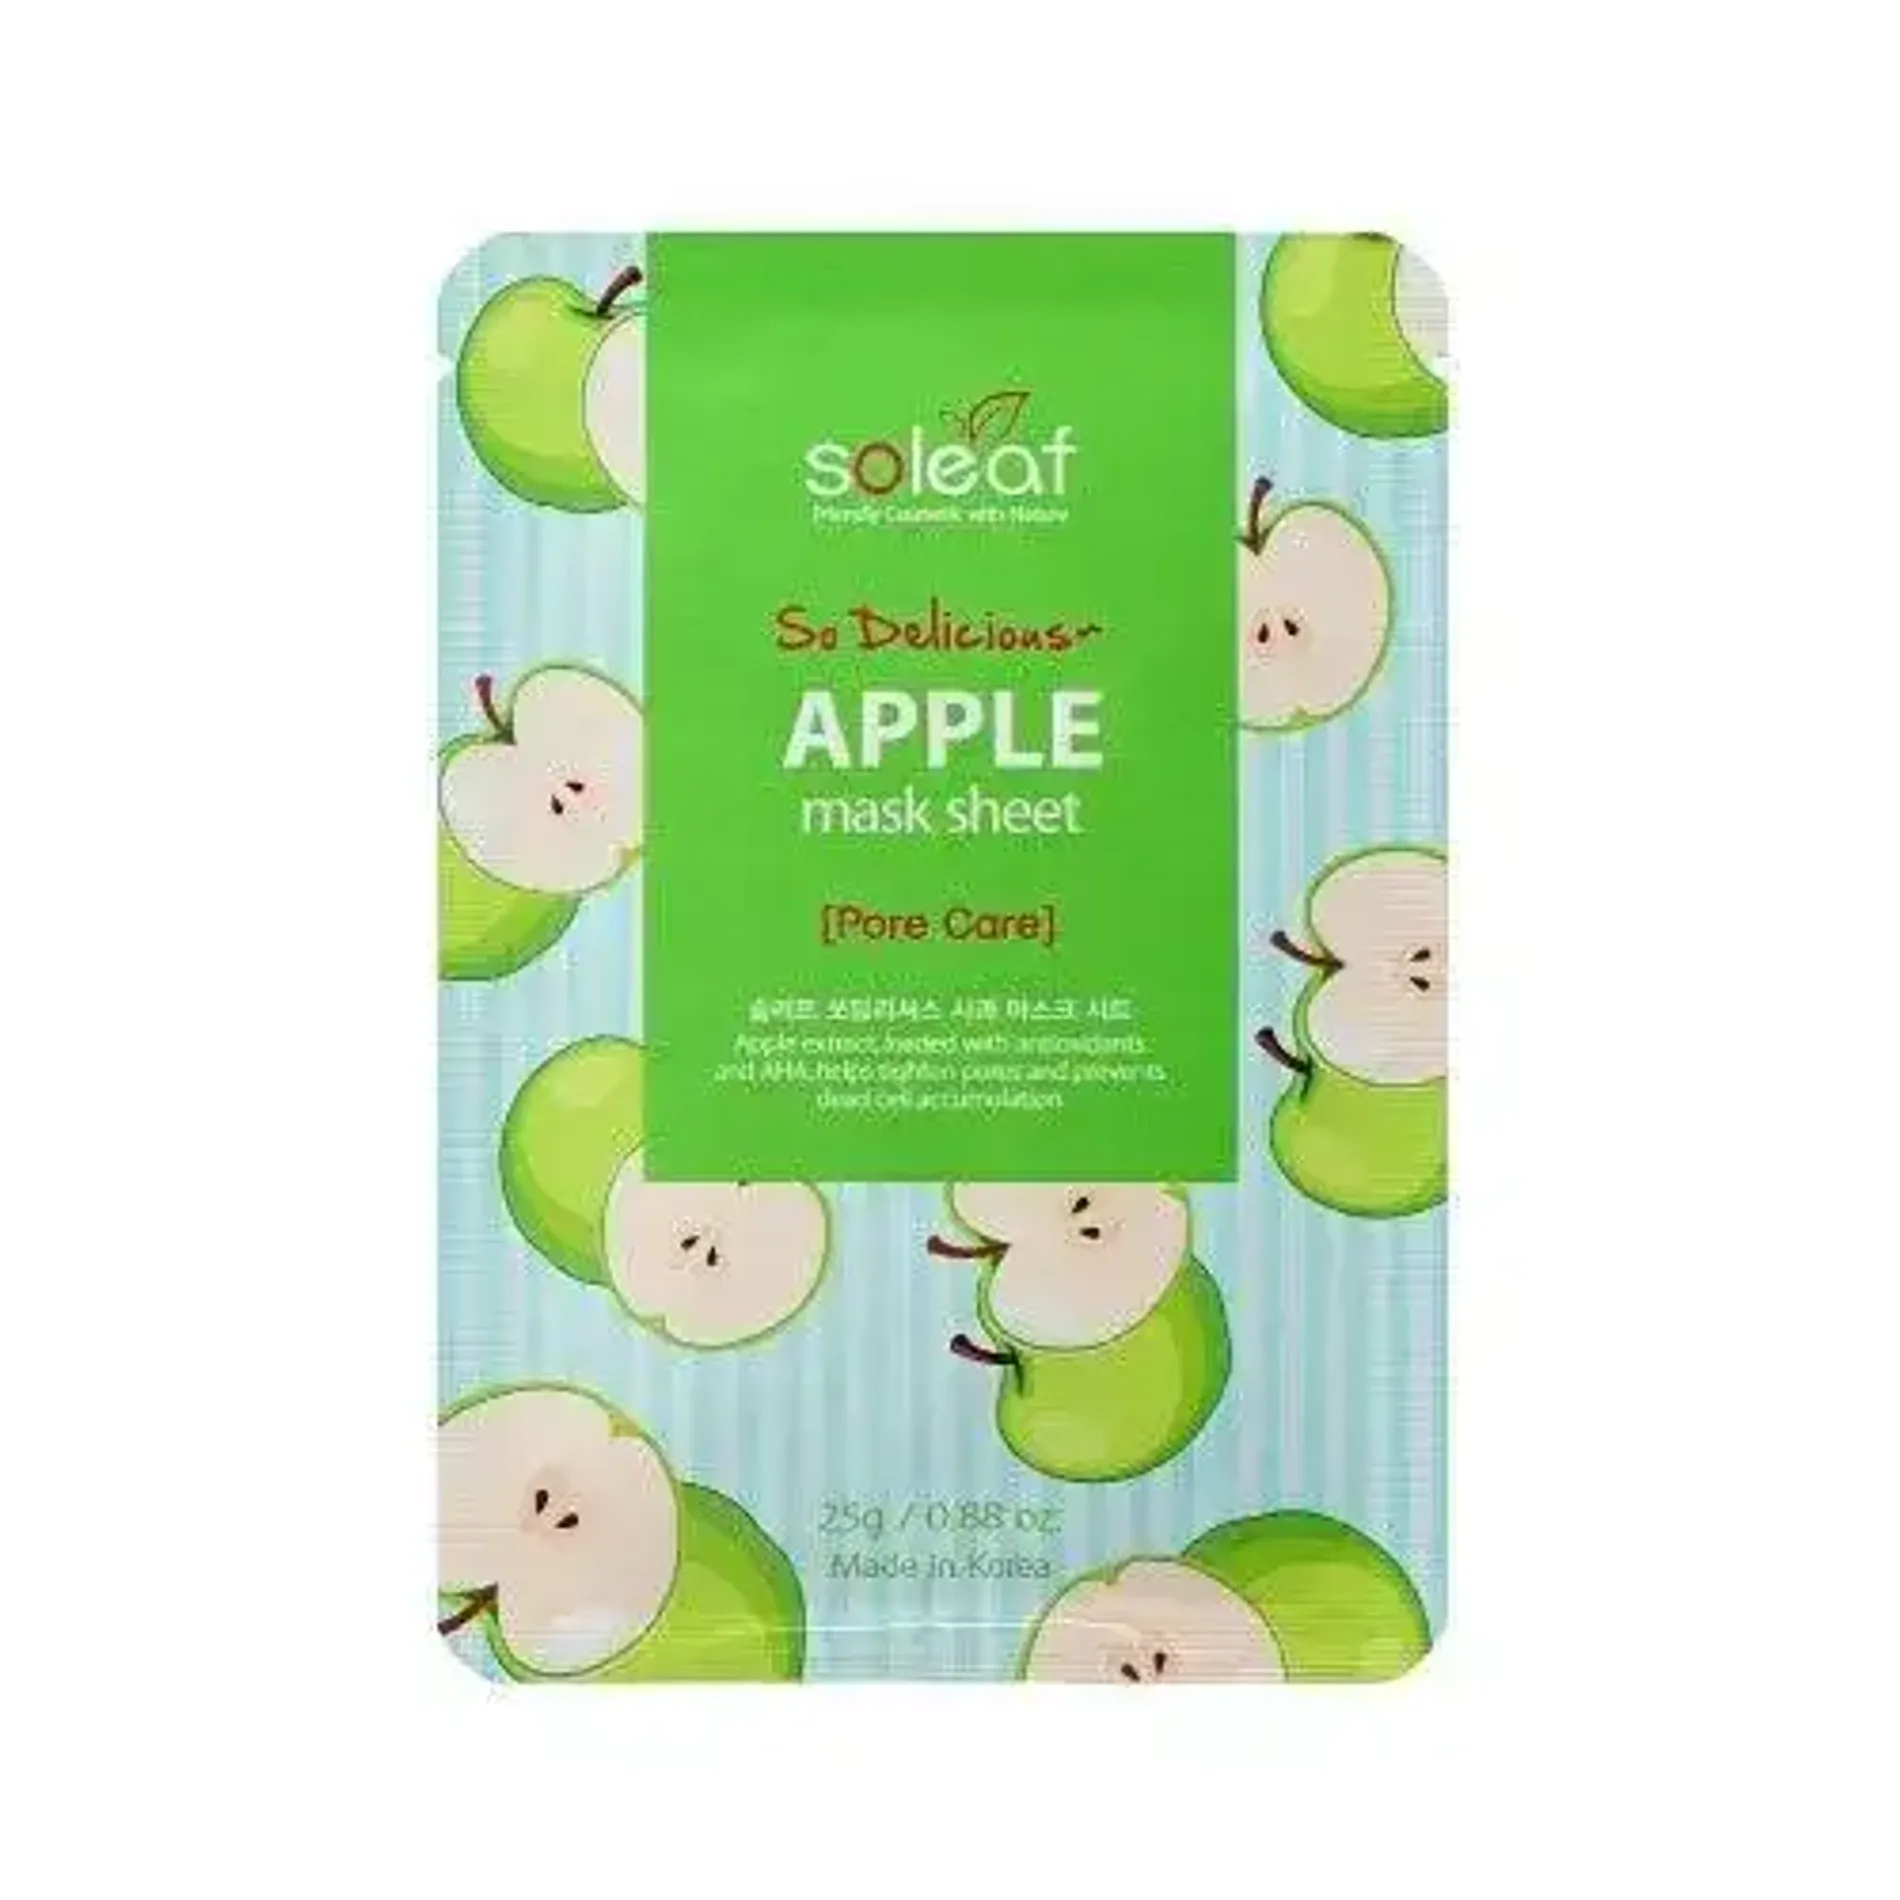 mat-na-giay-soleaf-so-delicious-apple-mask-sheet-1